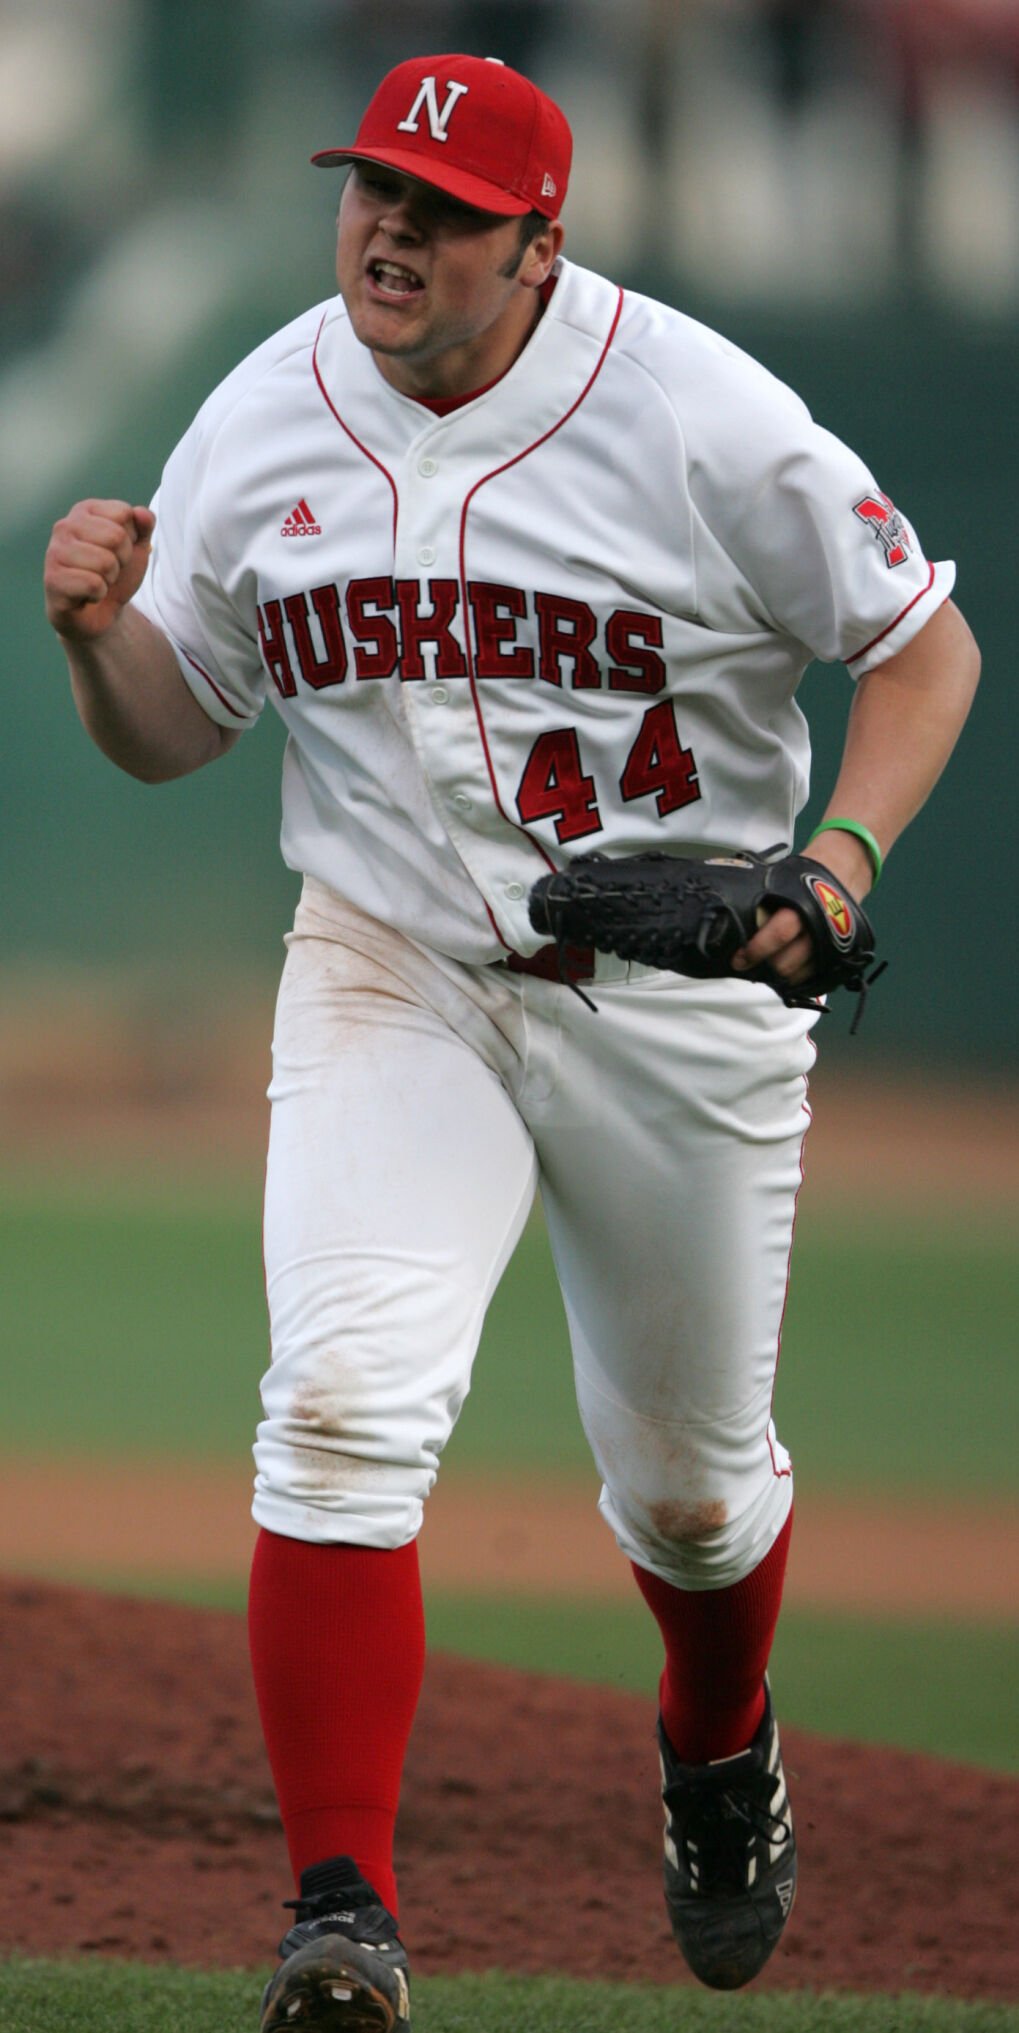 Back in the day, Feb. 17, 2006: NU ace Joba Chamberlain strikes out seven  in his season debut